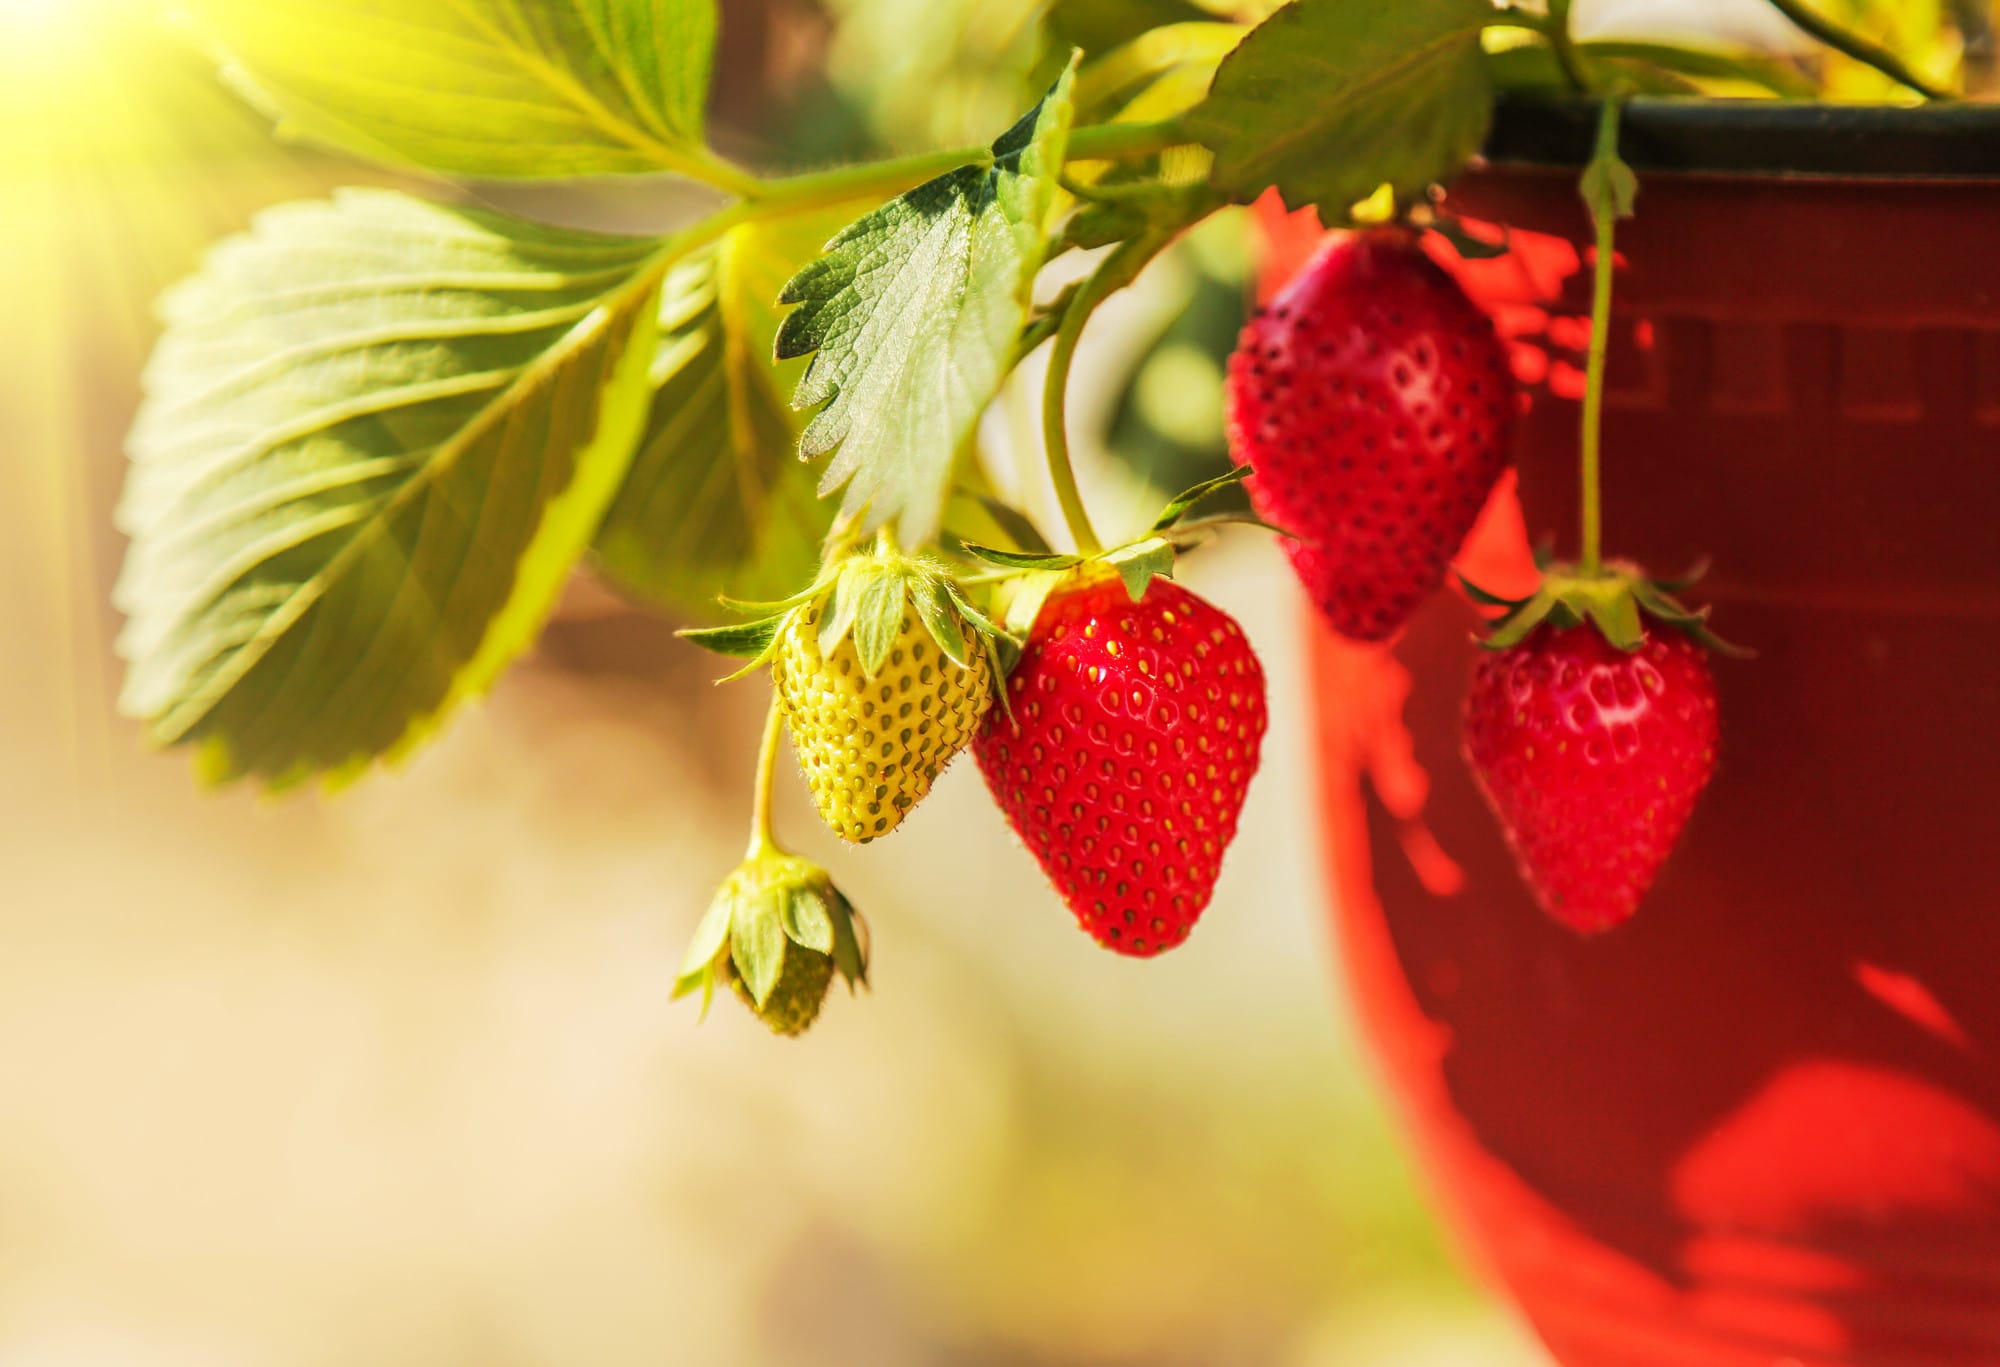 How to grow strawberries: from seed or runners